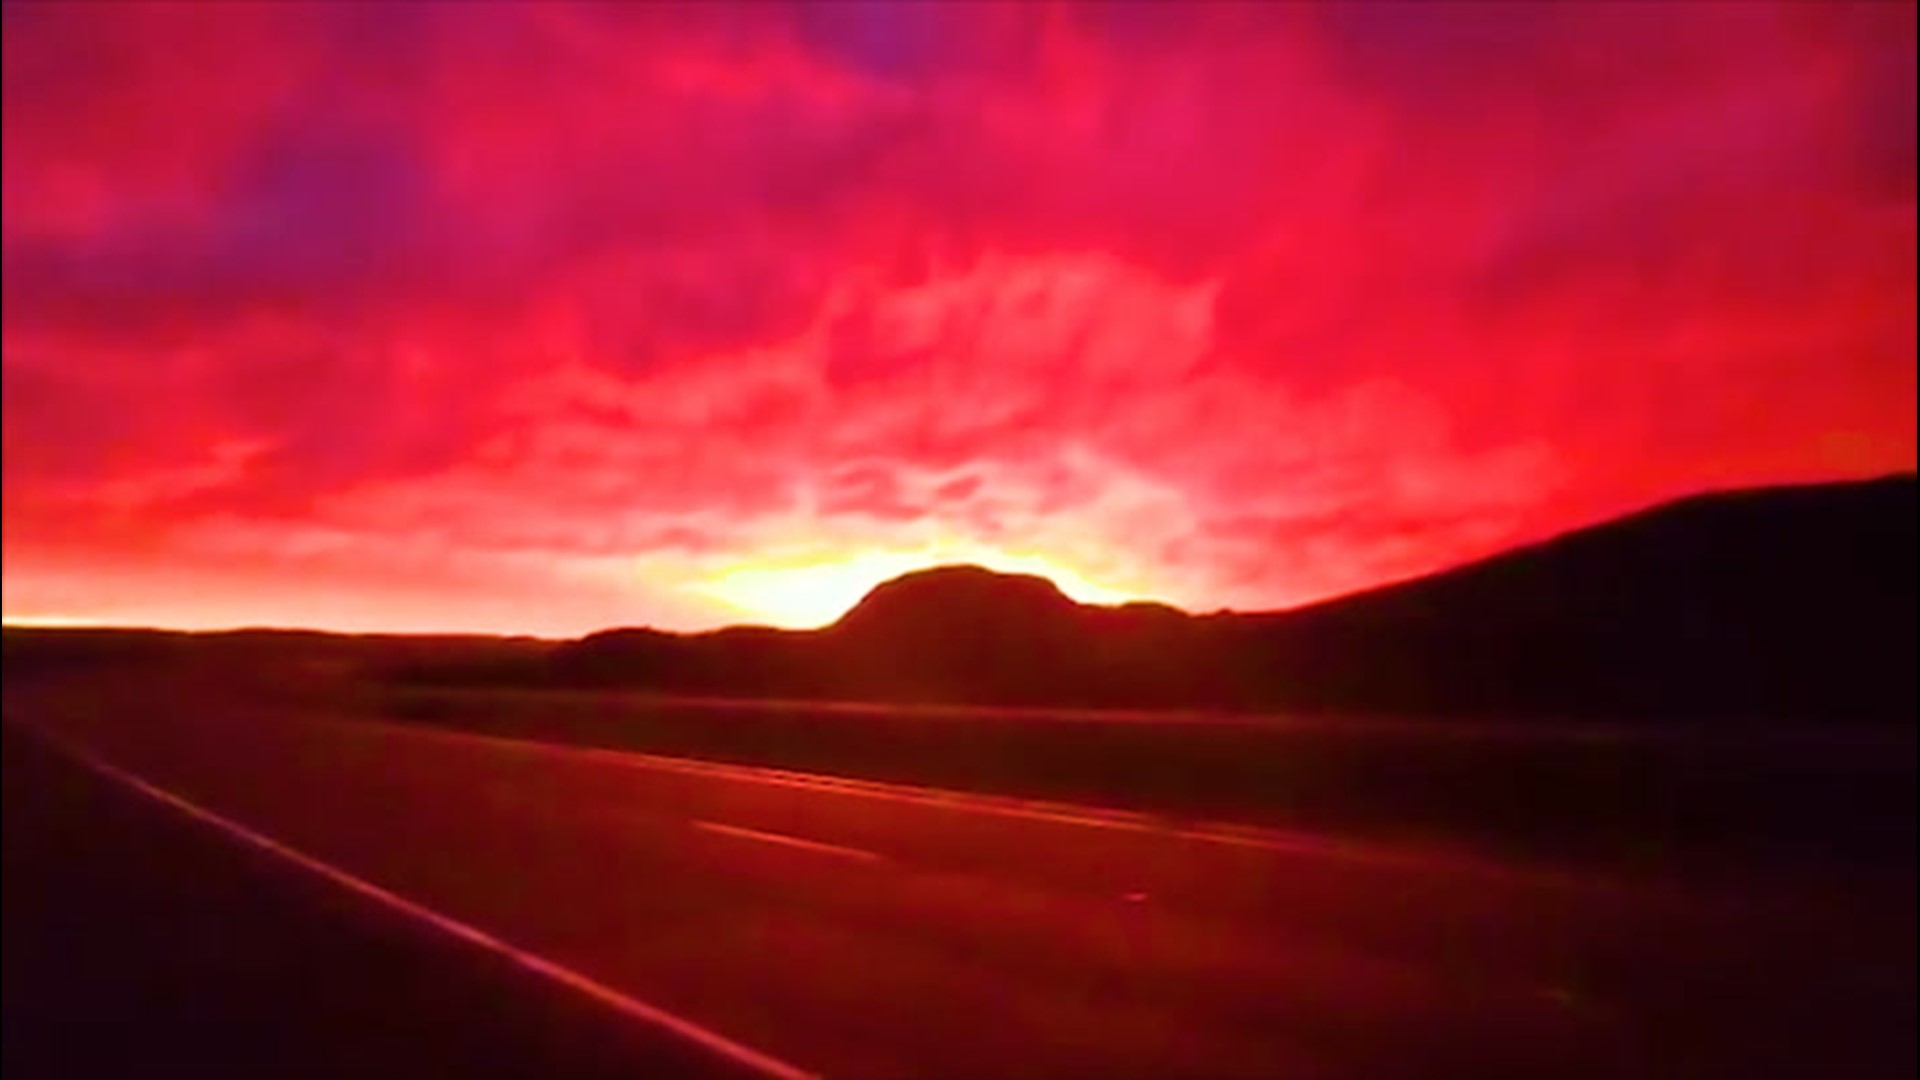 Why Does the Sky Turn Red at Sunrise and Sunset?